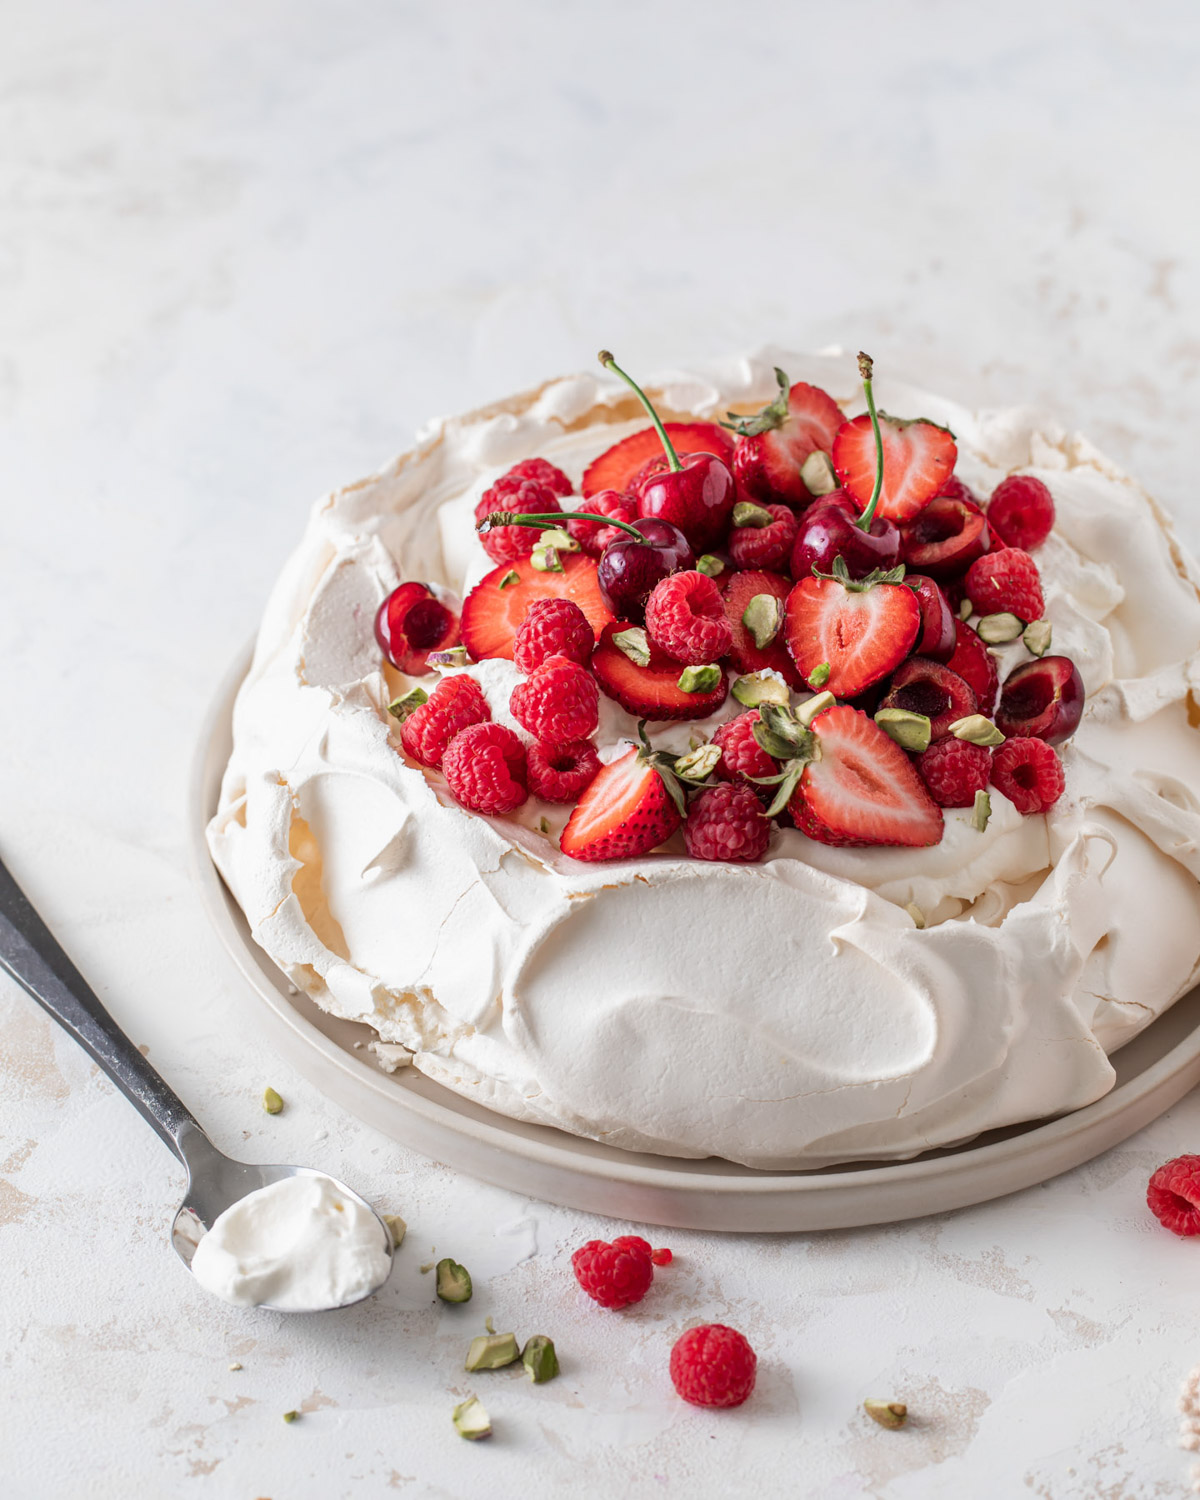 A bake pavlova with whipped cream on top and fresh berries